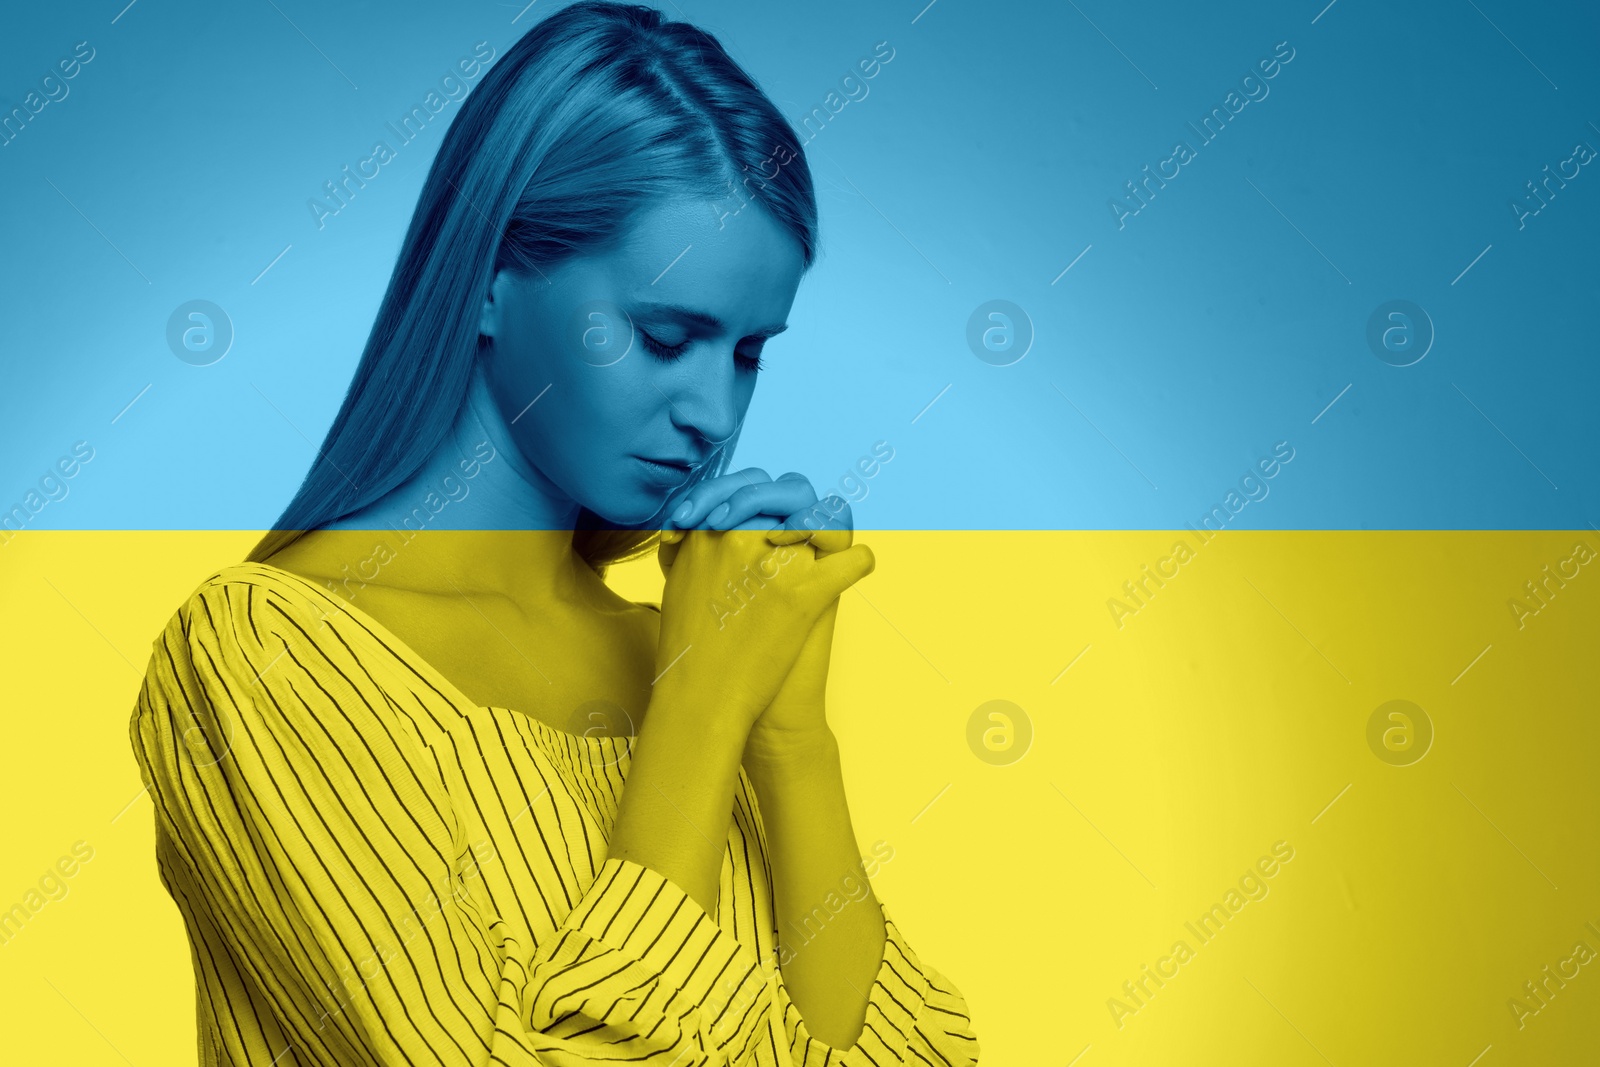 Image of Pray for Ukraine. Double exposure of young woman praying and Ukrainian national flag